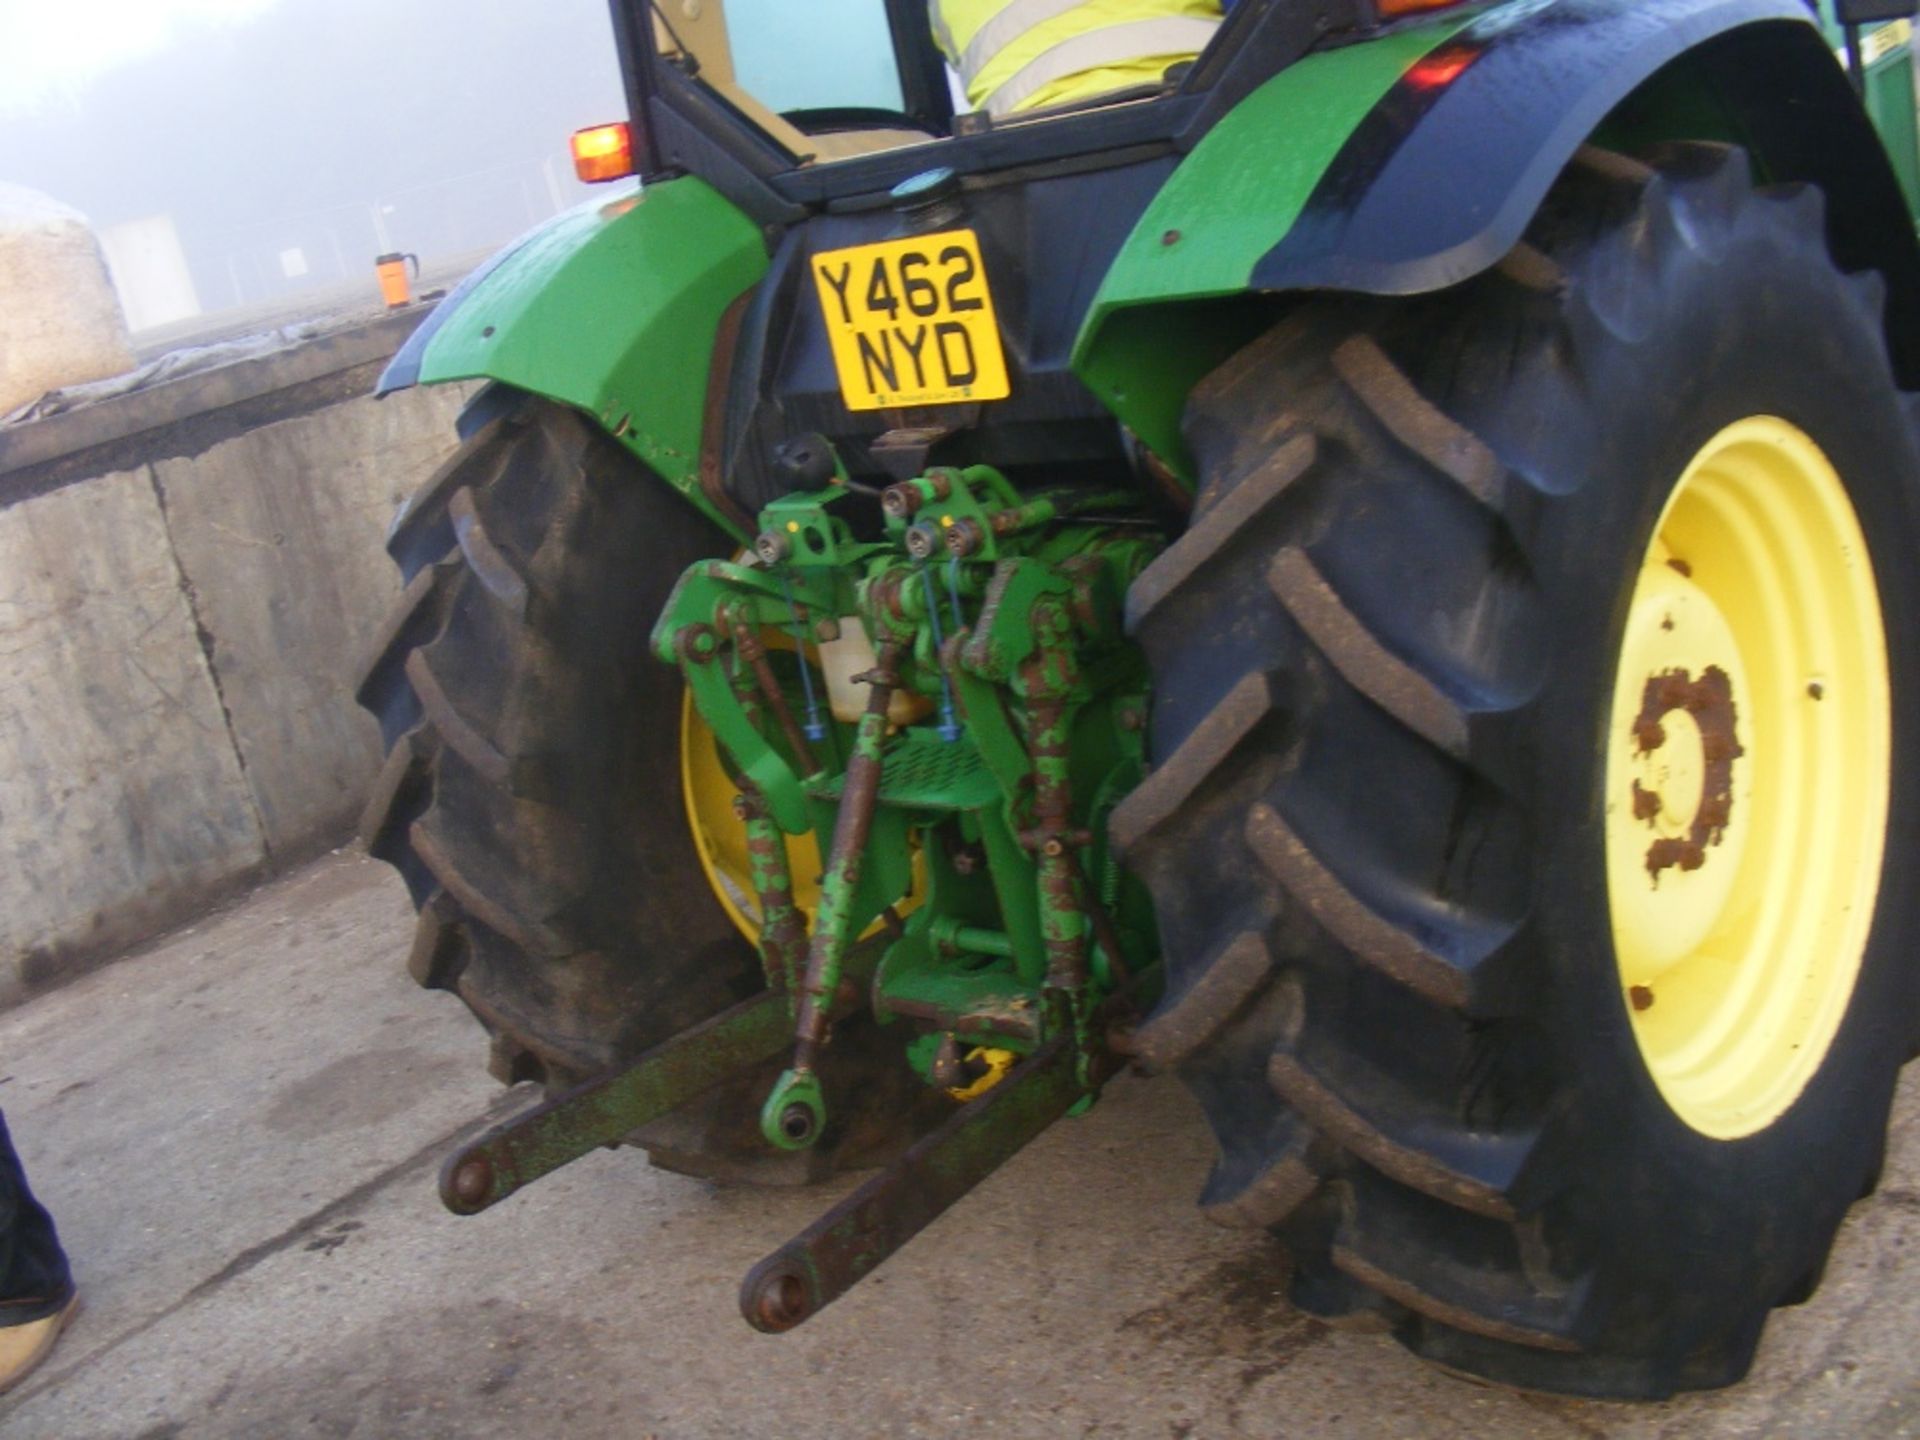 John Deere 5500 4wd Tractor 3000 Hrs Reg. No. Y462 NYD - Image 5 of 5